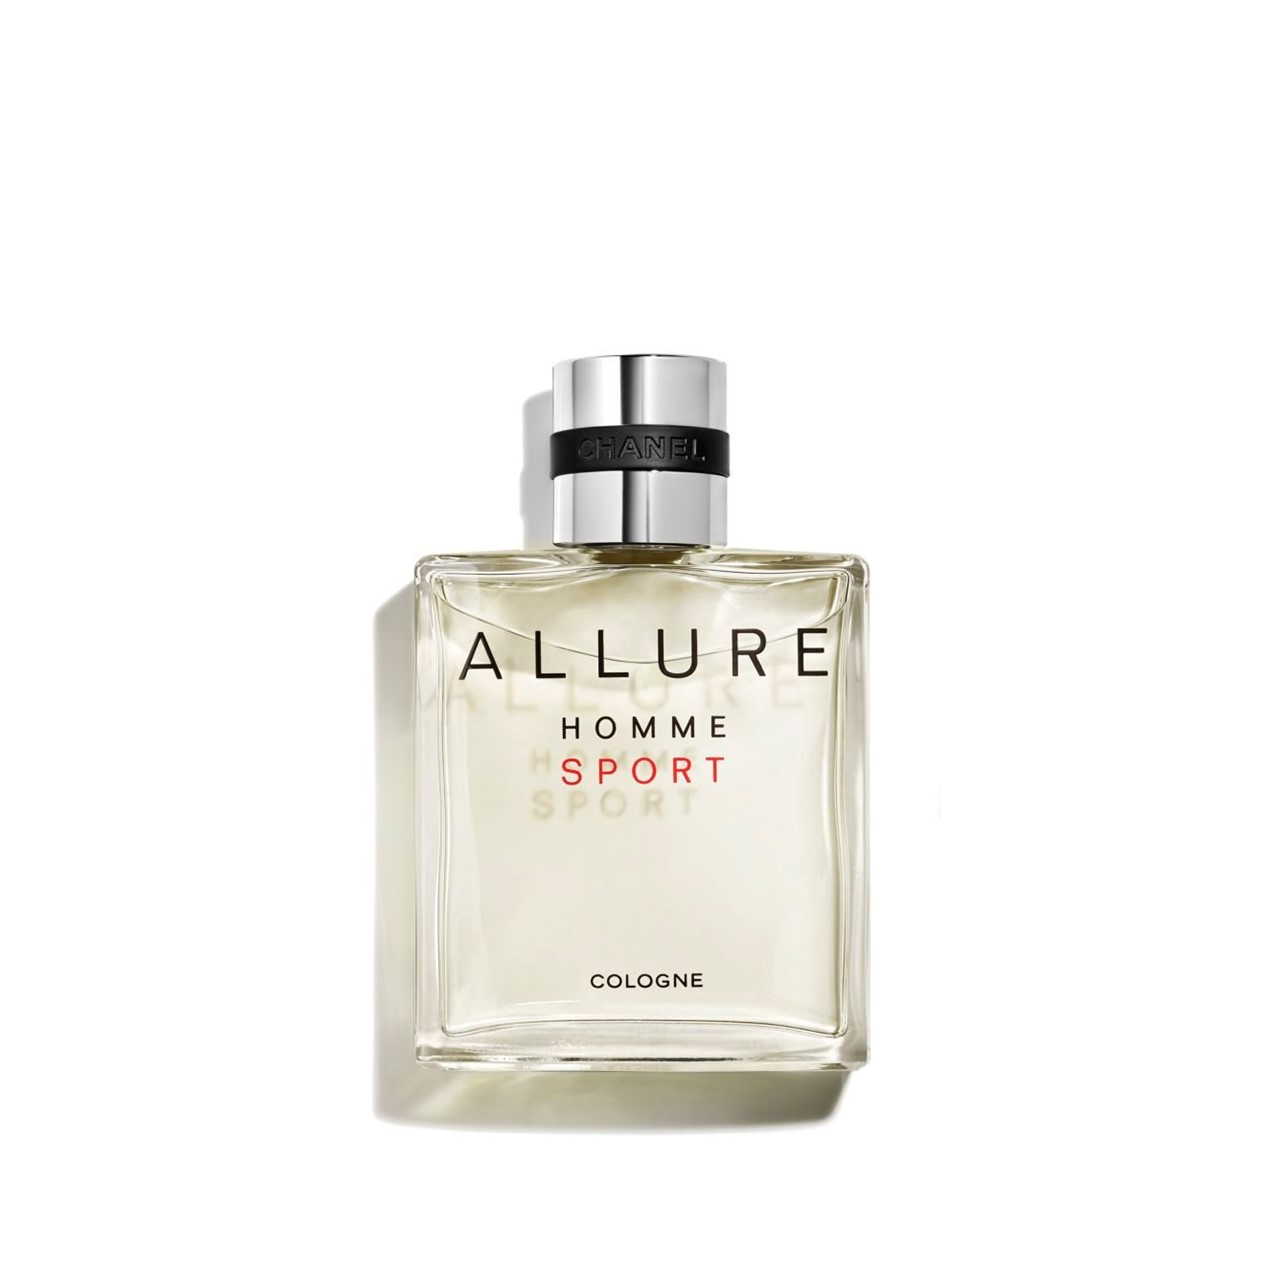 CHANEL Allure Homme Sport Cologne 50ml